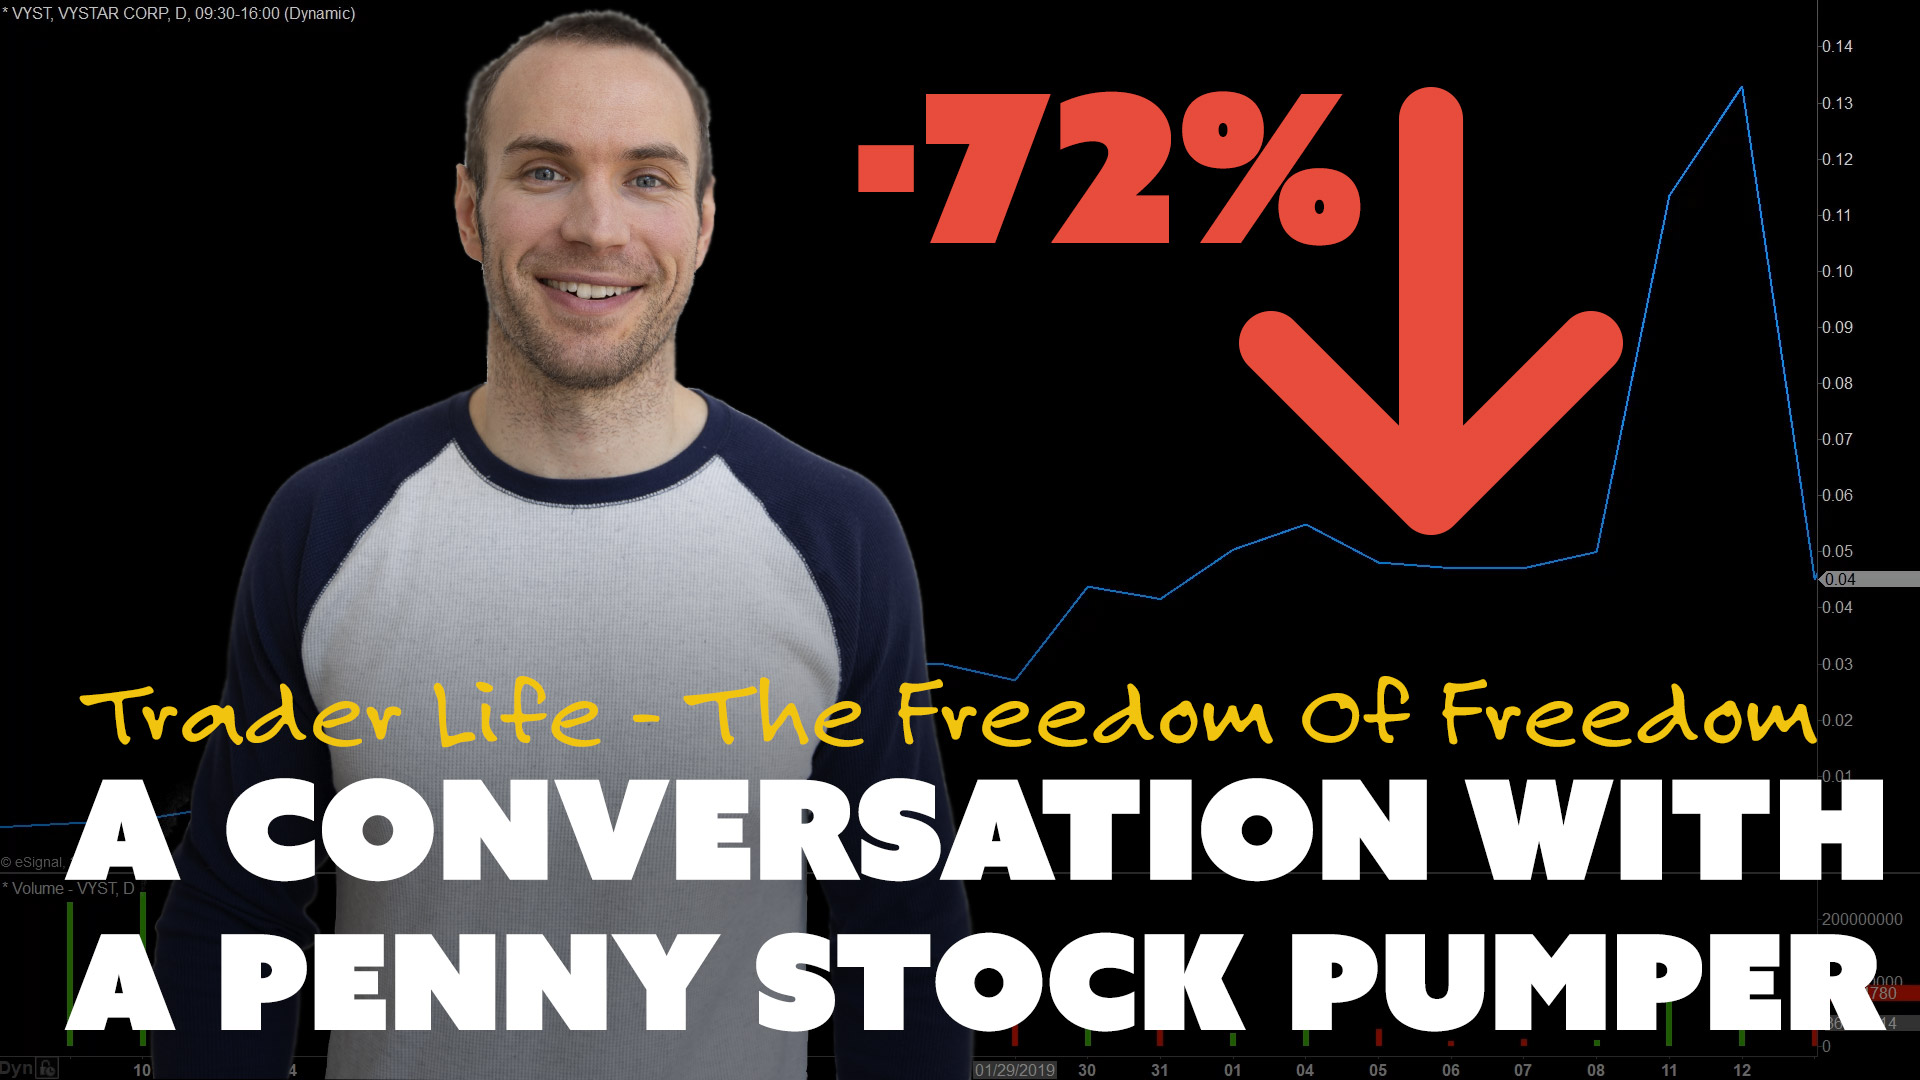 A Conversation with a Penny Stock Pumper